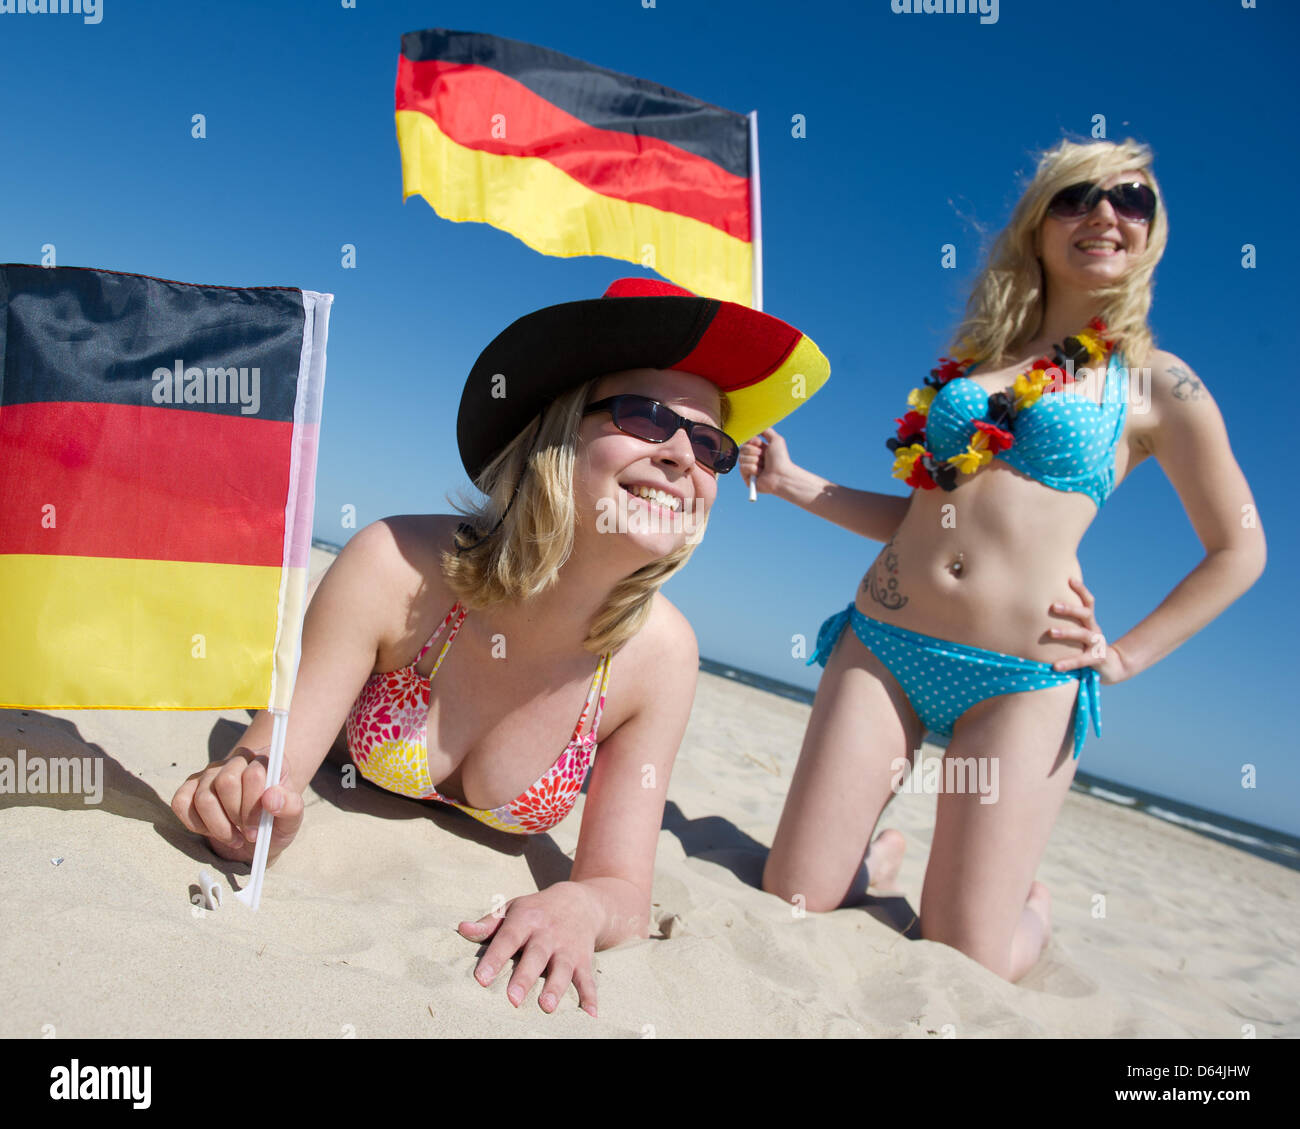 ILLUSTRATION - Natalie and Jule (R-L) hold German flags in preparation for the European Championships at the Baltic Sea beach of Trassenheide, Germany, 25 May 2012. Public broadcaster ZDF plans to cover the Euro 2012 and additional programmes from the Island of Usedom. Photo: Stefan Sauer Stock Photo